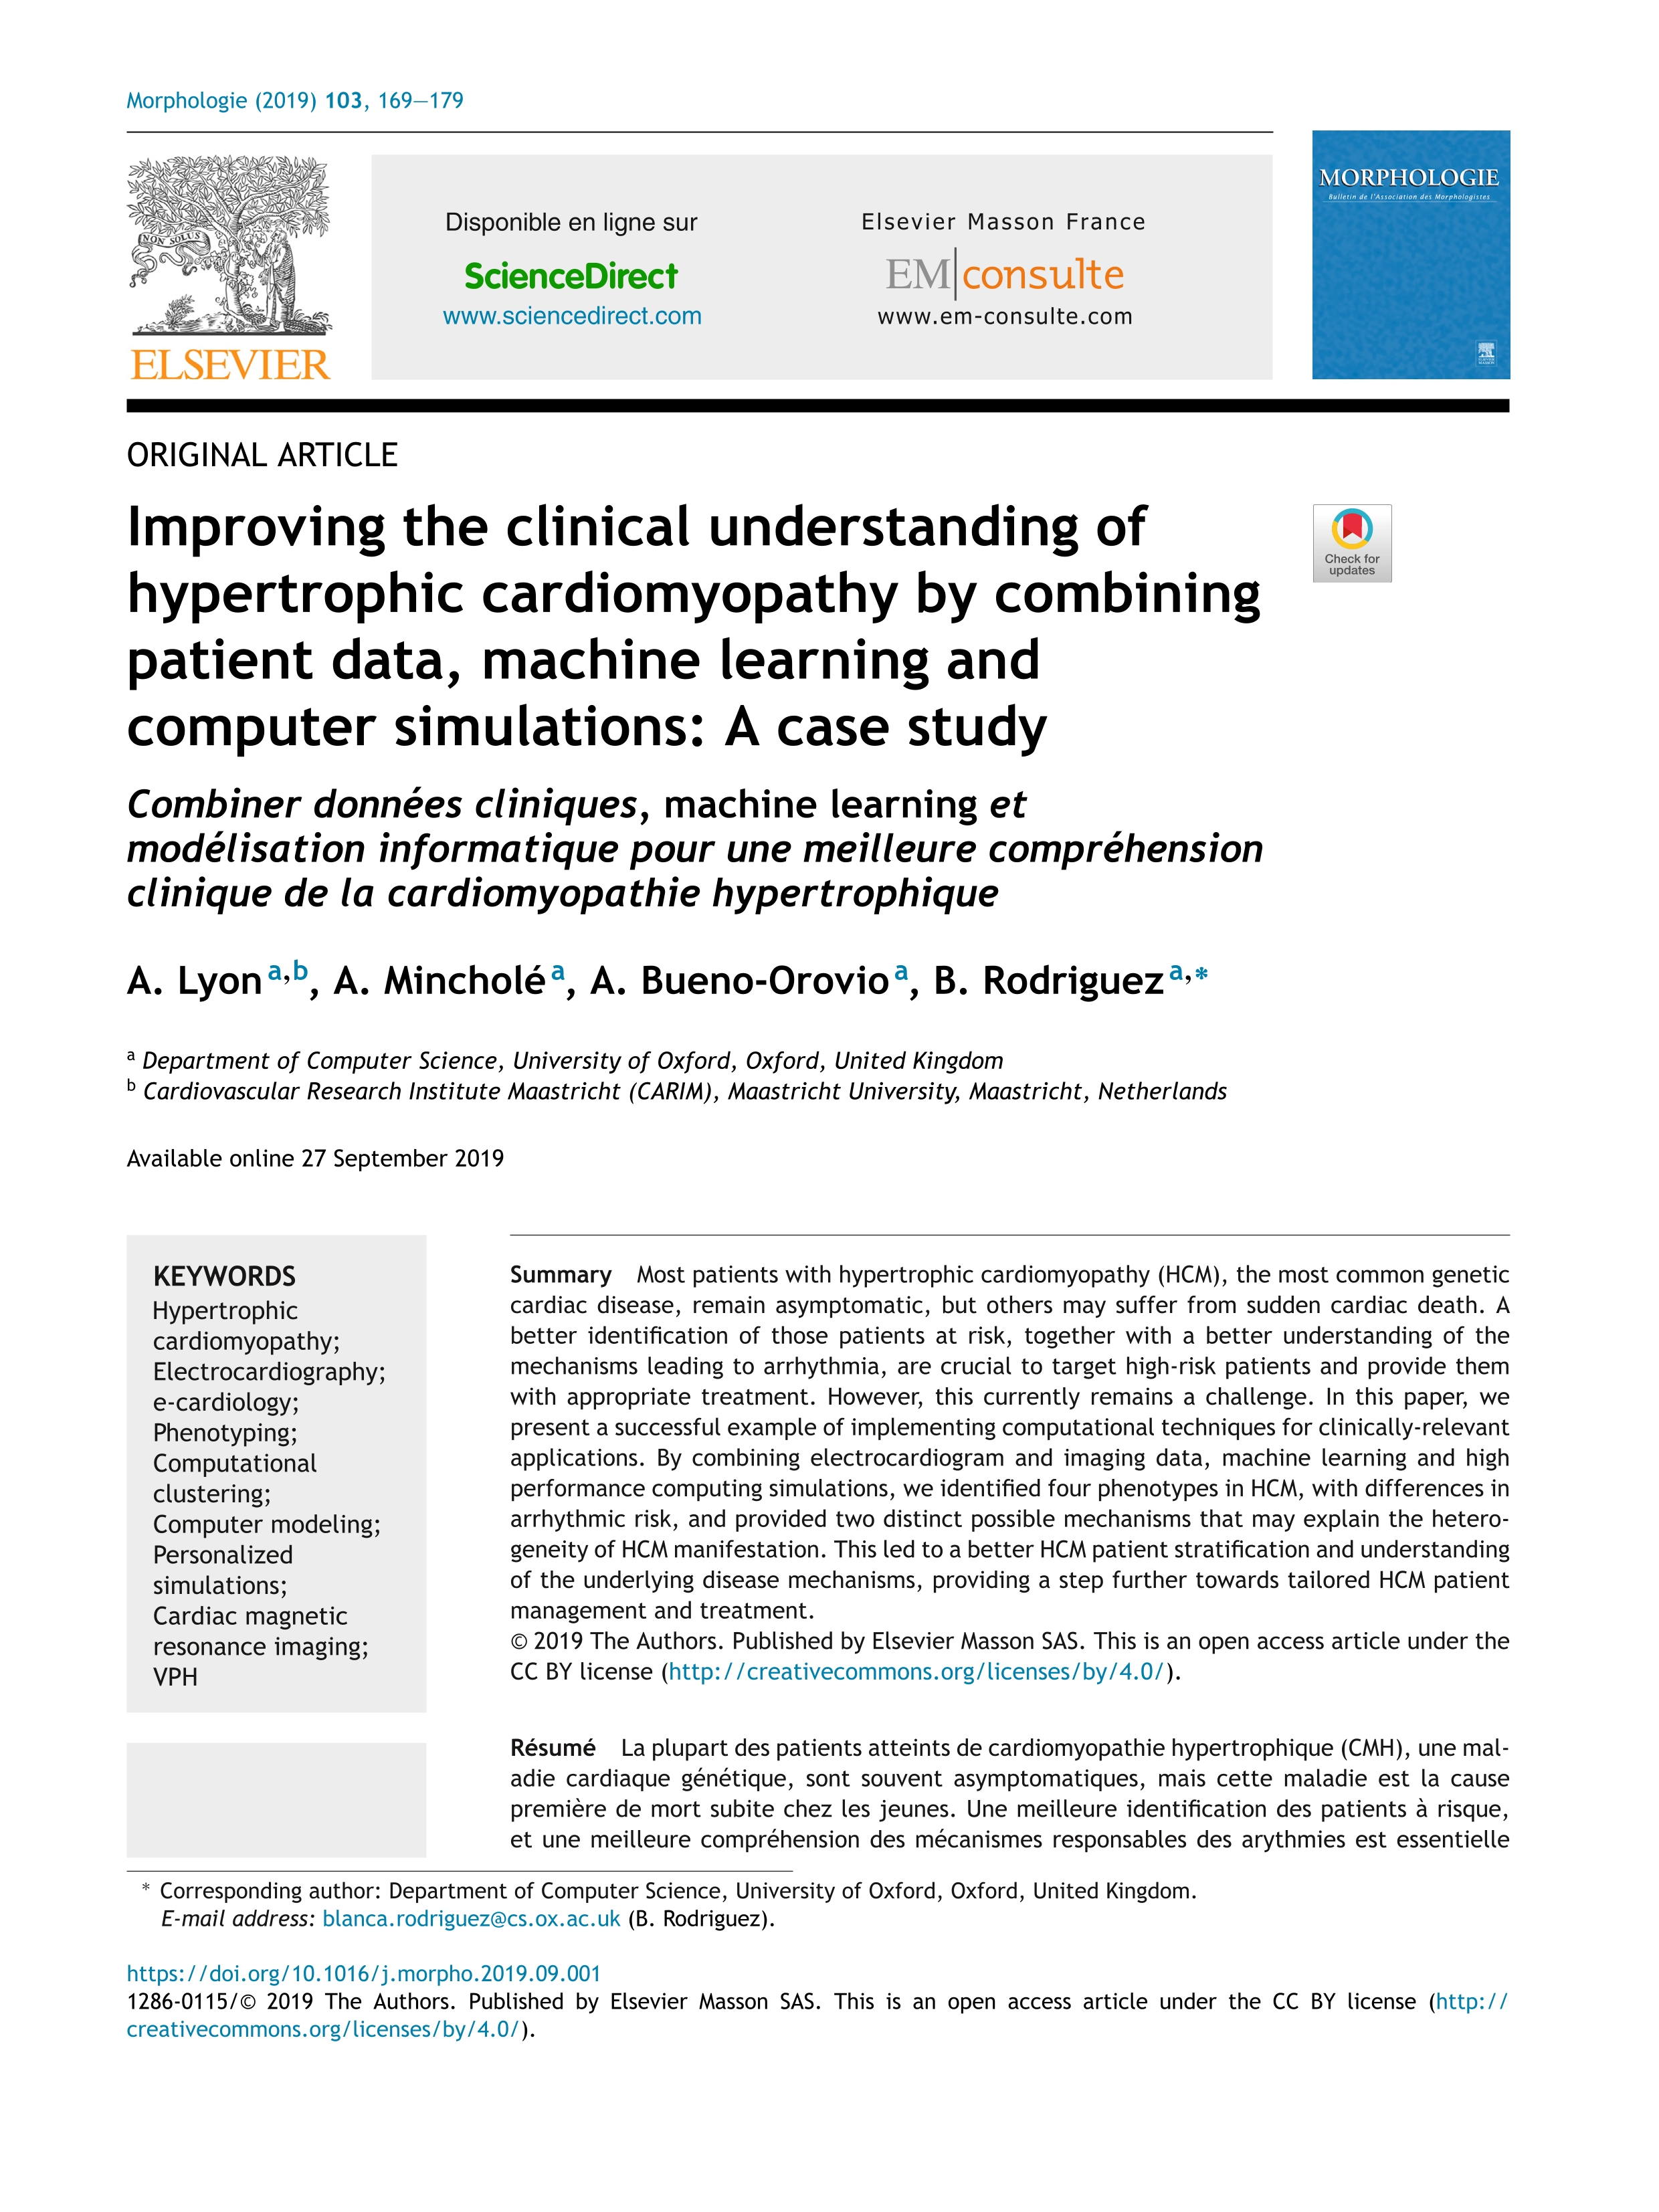 Improving the clinical understanding of hypertrophic cardiomyopathy by combining patient data, machine learning and computer simulations: A case study